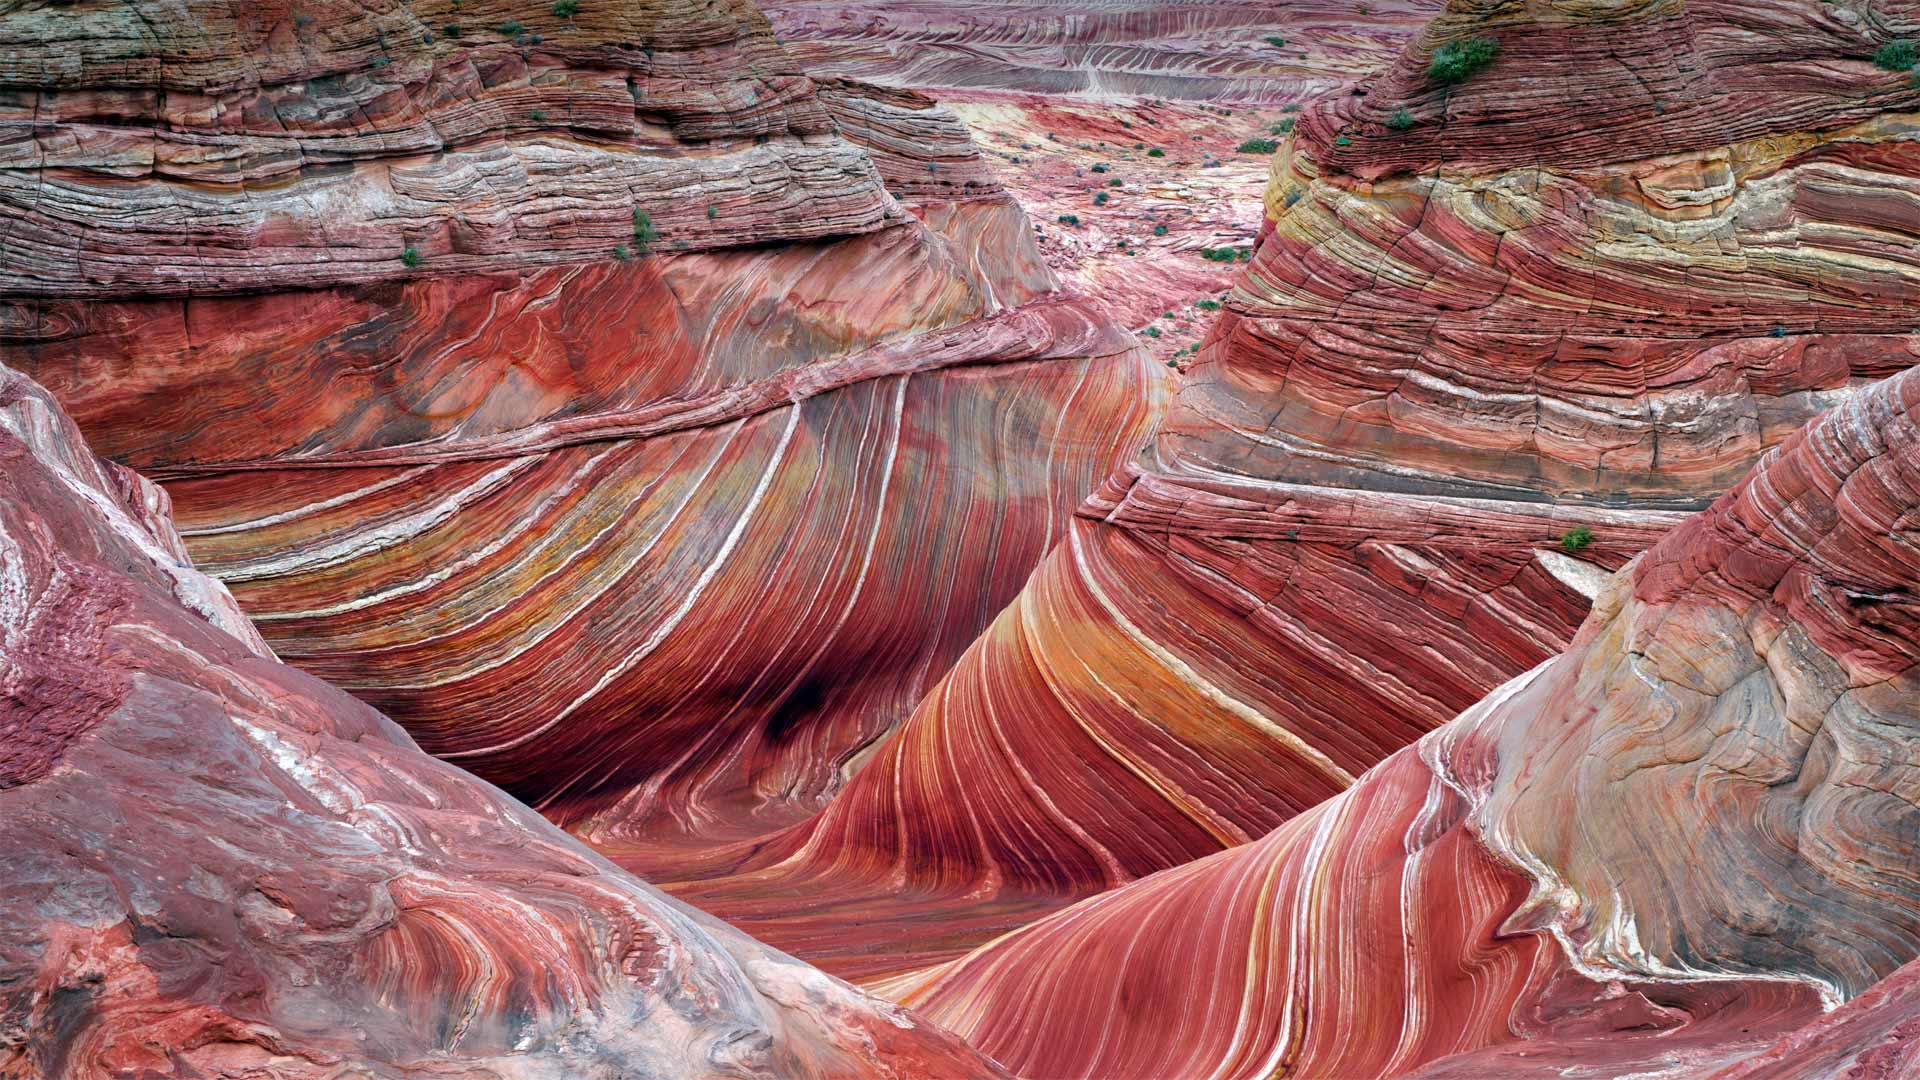 The Wave sandstone formation in Coyote Buttes North, Paria Canyon-Vermilion Cliffs National Monument, Arizona - Dennis Frates/Alamy)